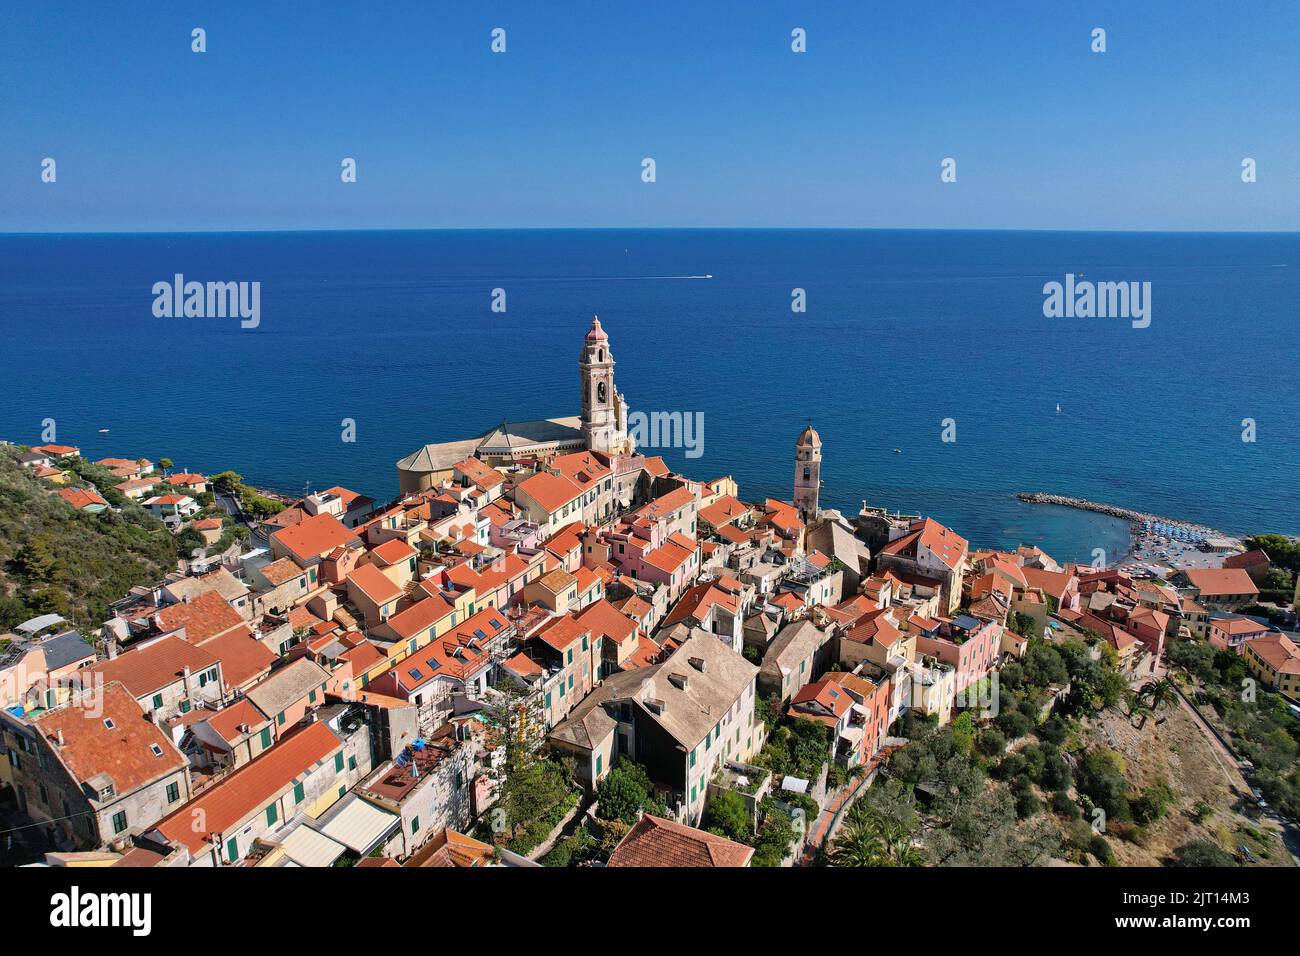 Aerial view of the village of Cervo on the Italian Riviera in the province of Imperia, Liguria, Italy. Stock Photo